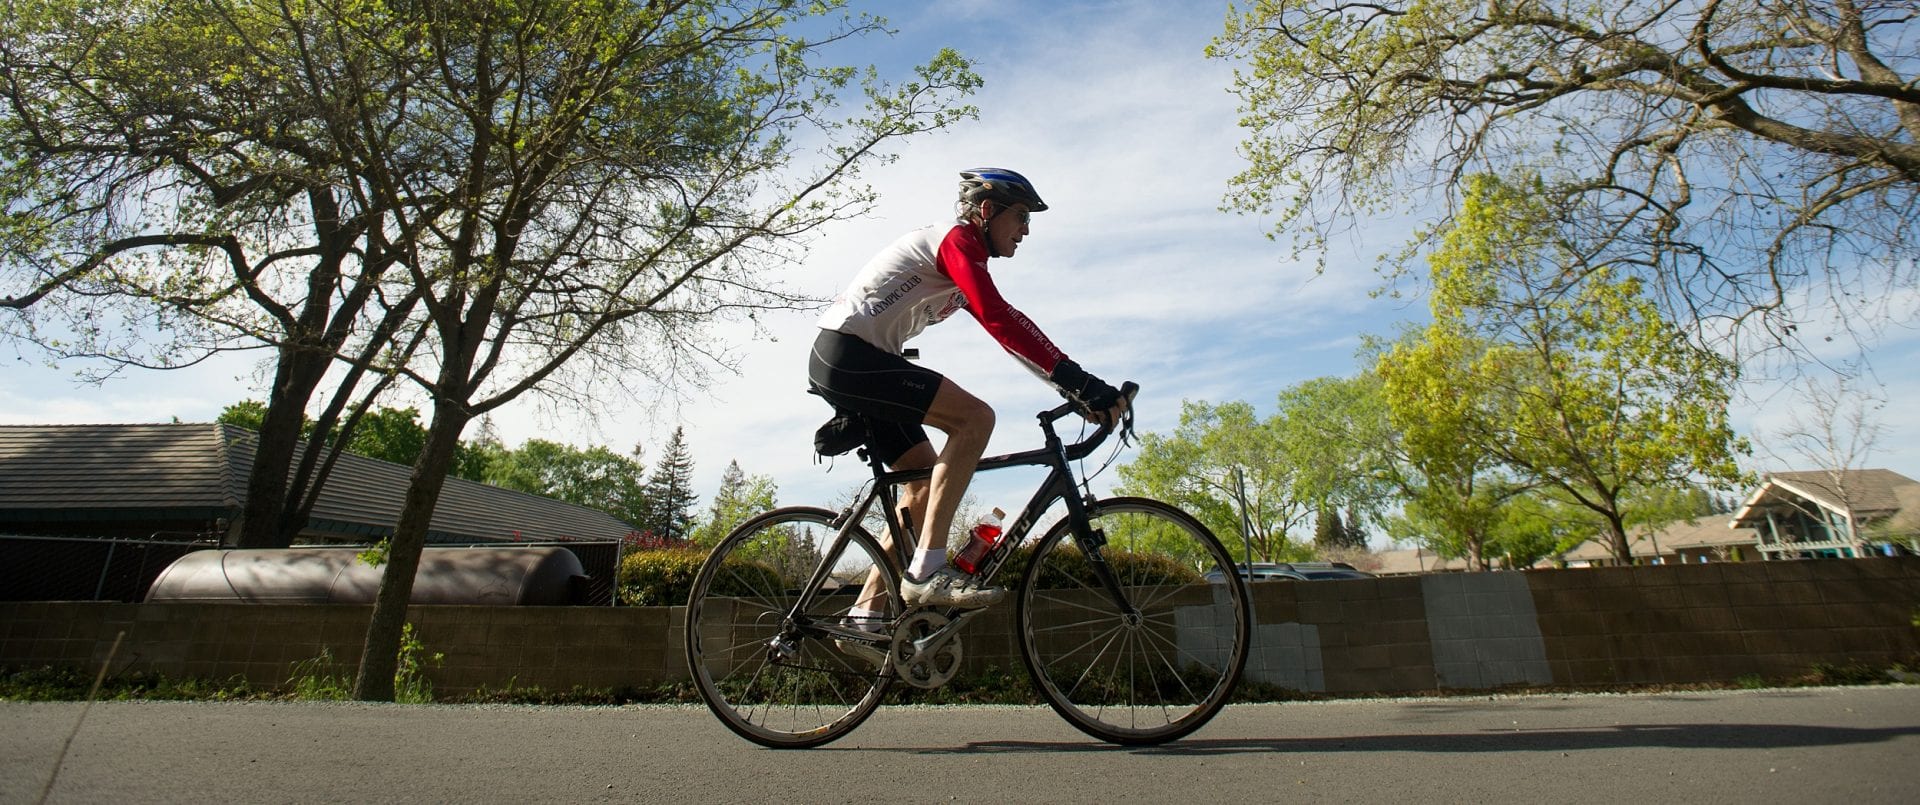 electric-bicycle-rebate-pilot-program-launches-in-contra-costa-county